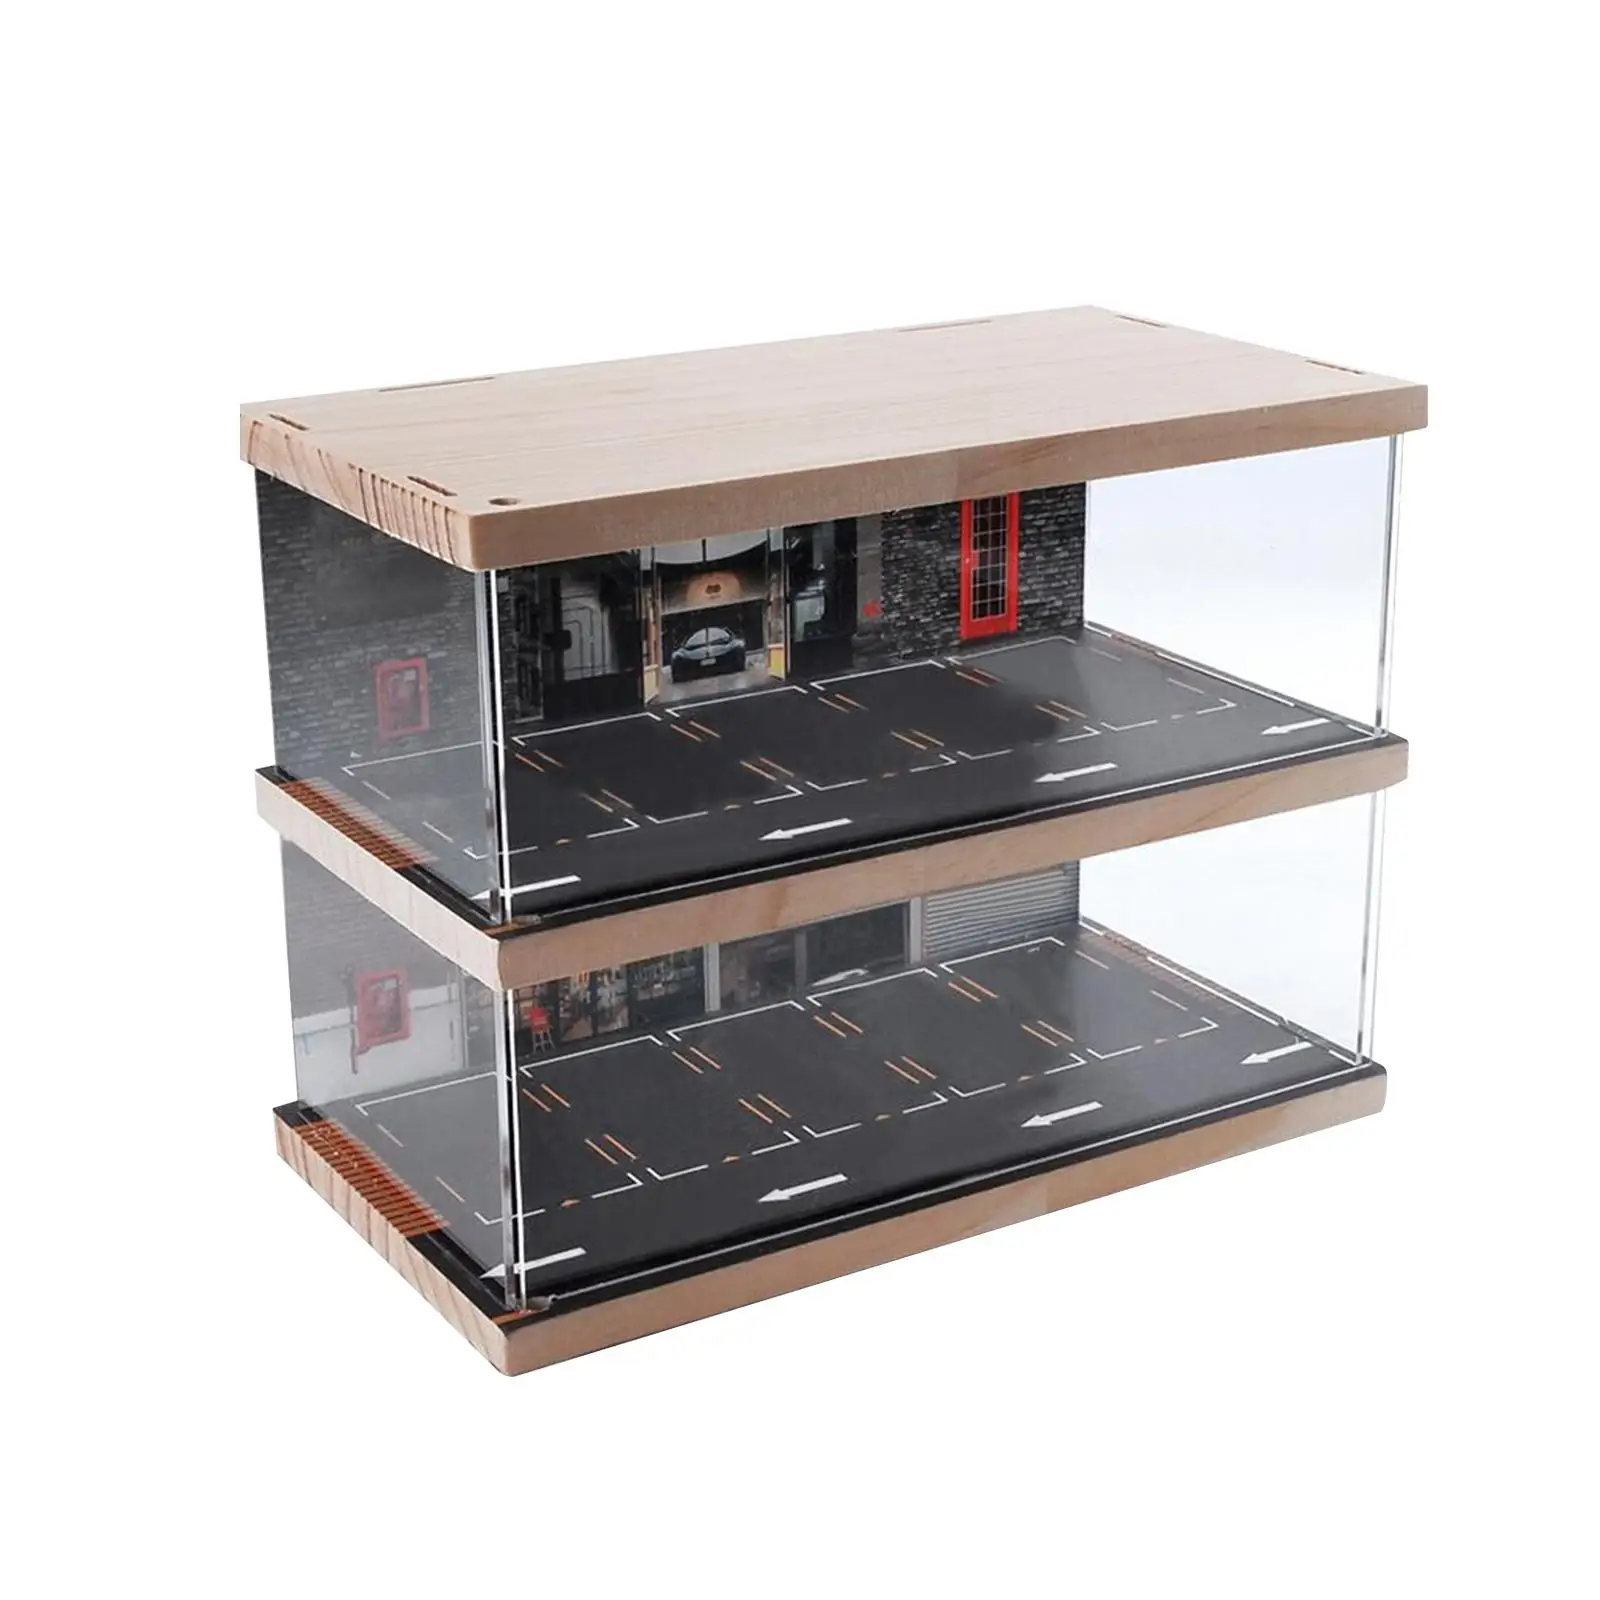 1:64 Parking Lot Display Case Collectibles Acrylic Dustproof Container Protection Collection Diorama